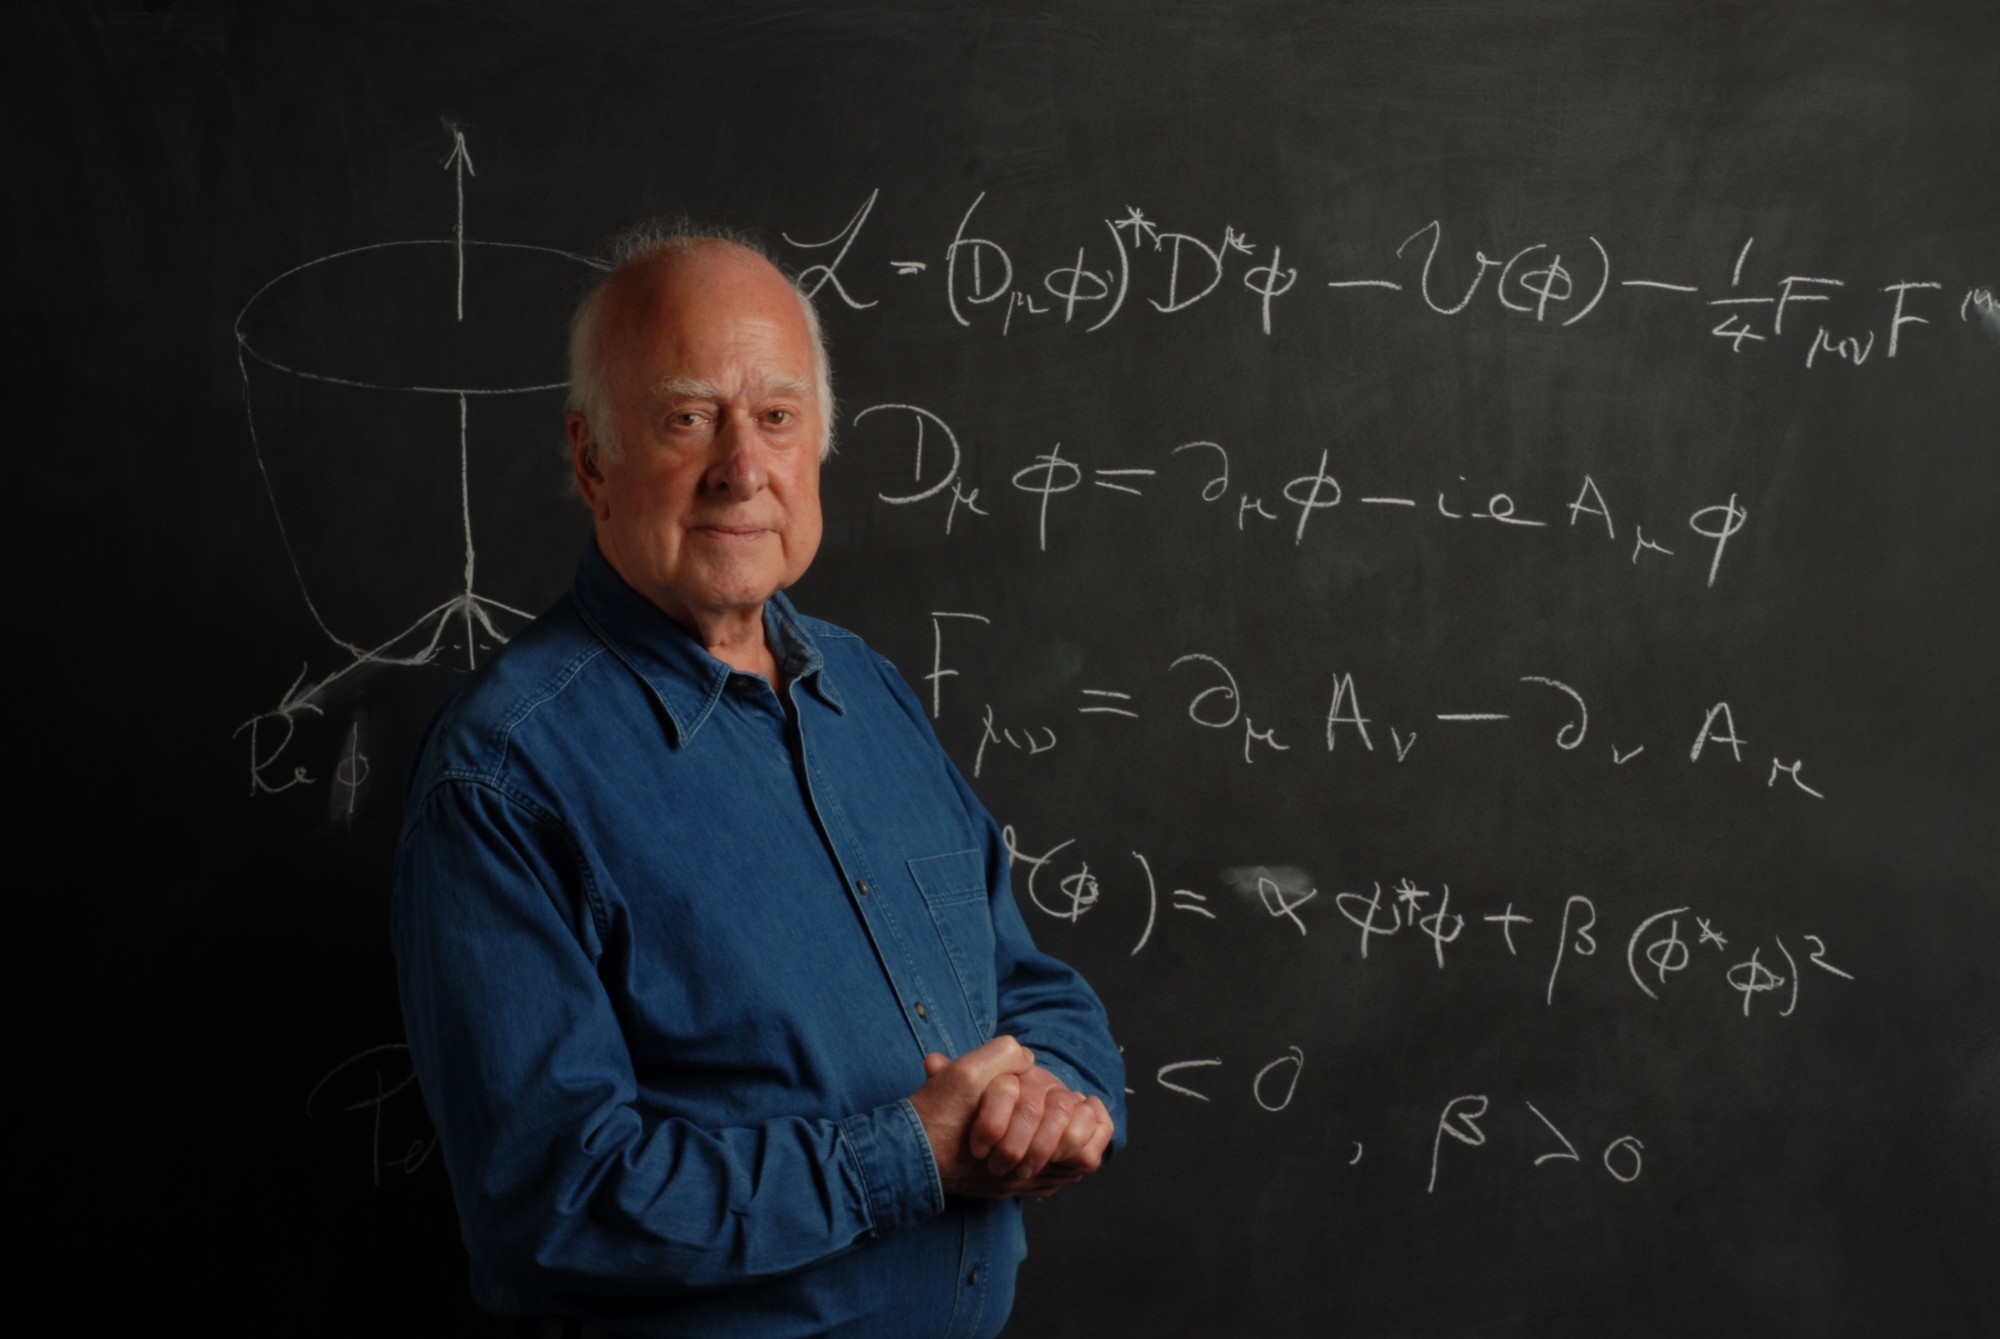 Photographic portrait of Peter Higgs, in front of blackboard, taken by Peter Tuffy. 17 June 2009.